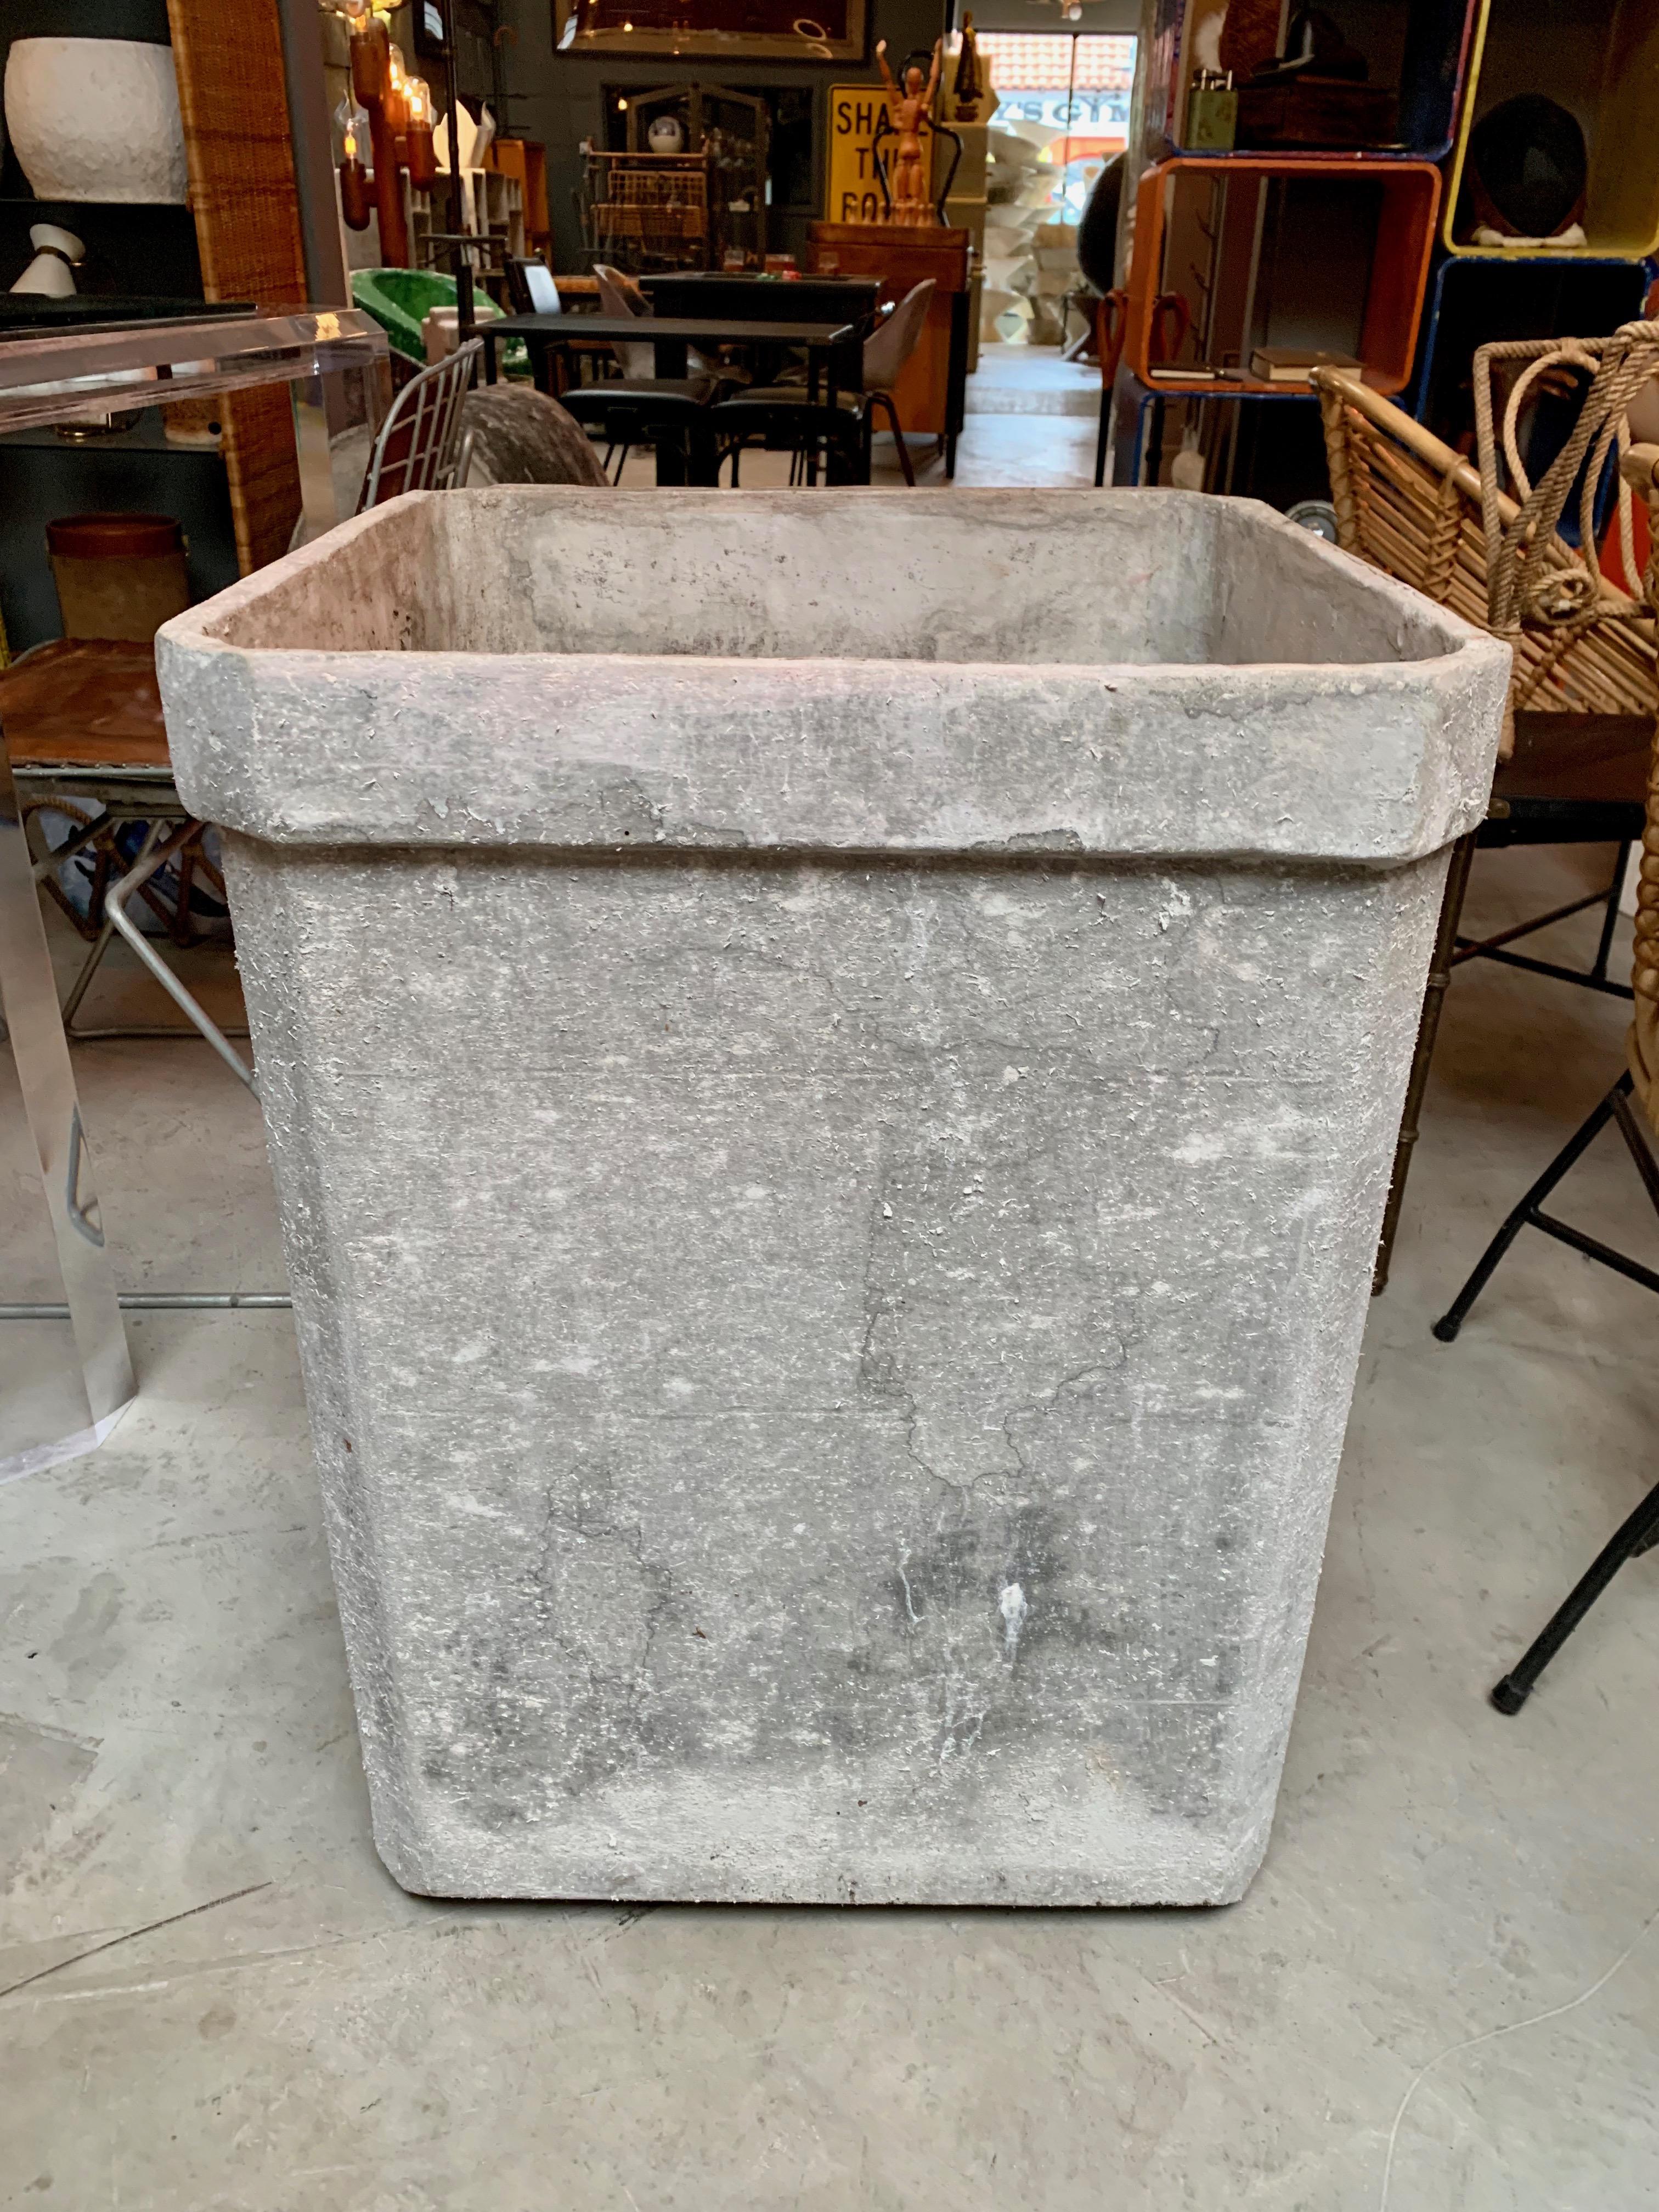 Great oversized planter by Willy Guhl for Eternit. Classic design. Fantastic original patina and in very good condition. Tall bin perfect for planting a tree or large plant. Only one available. 


